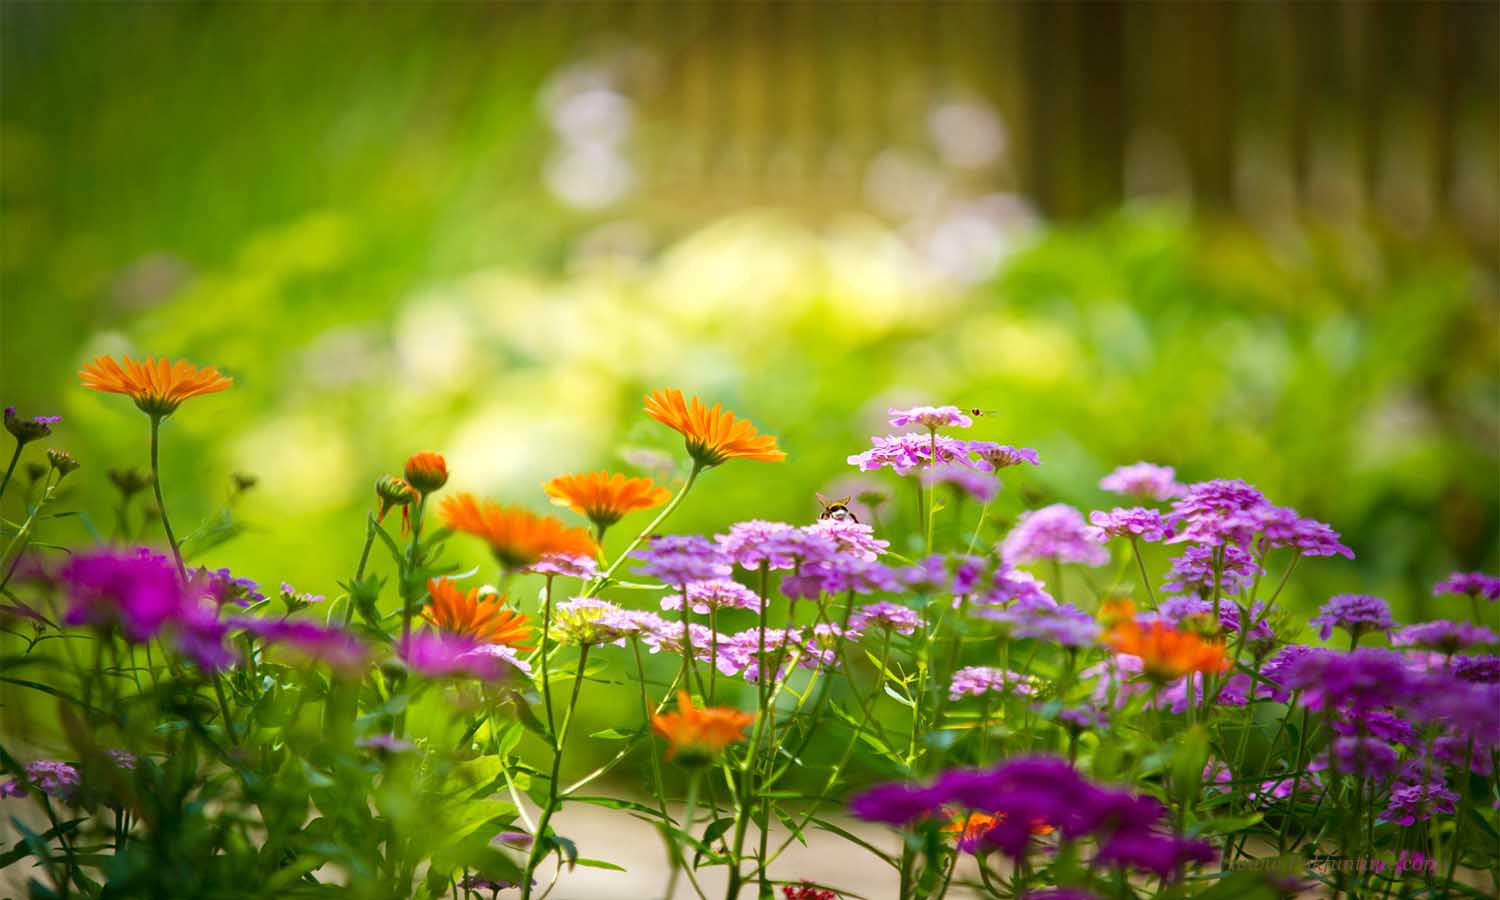 Nature flower wallpaper free download - 7HDBackgrounds